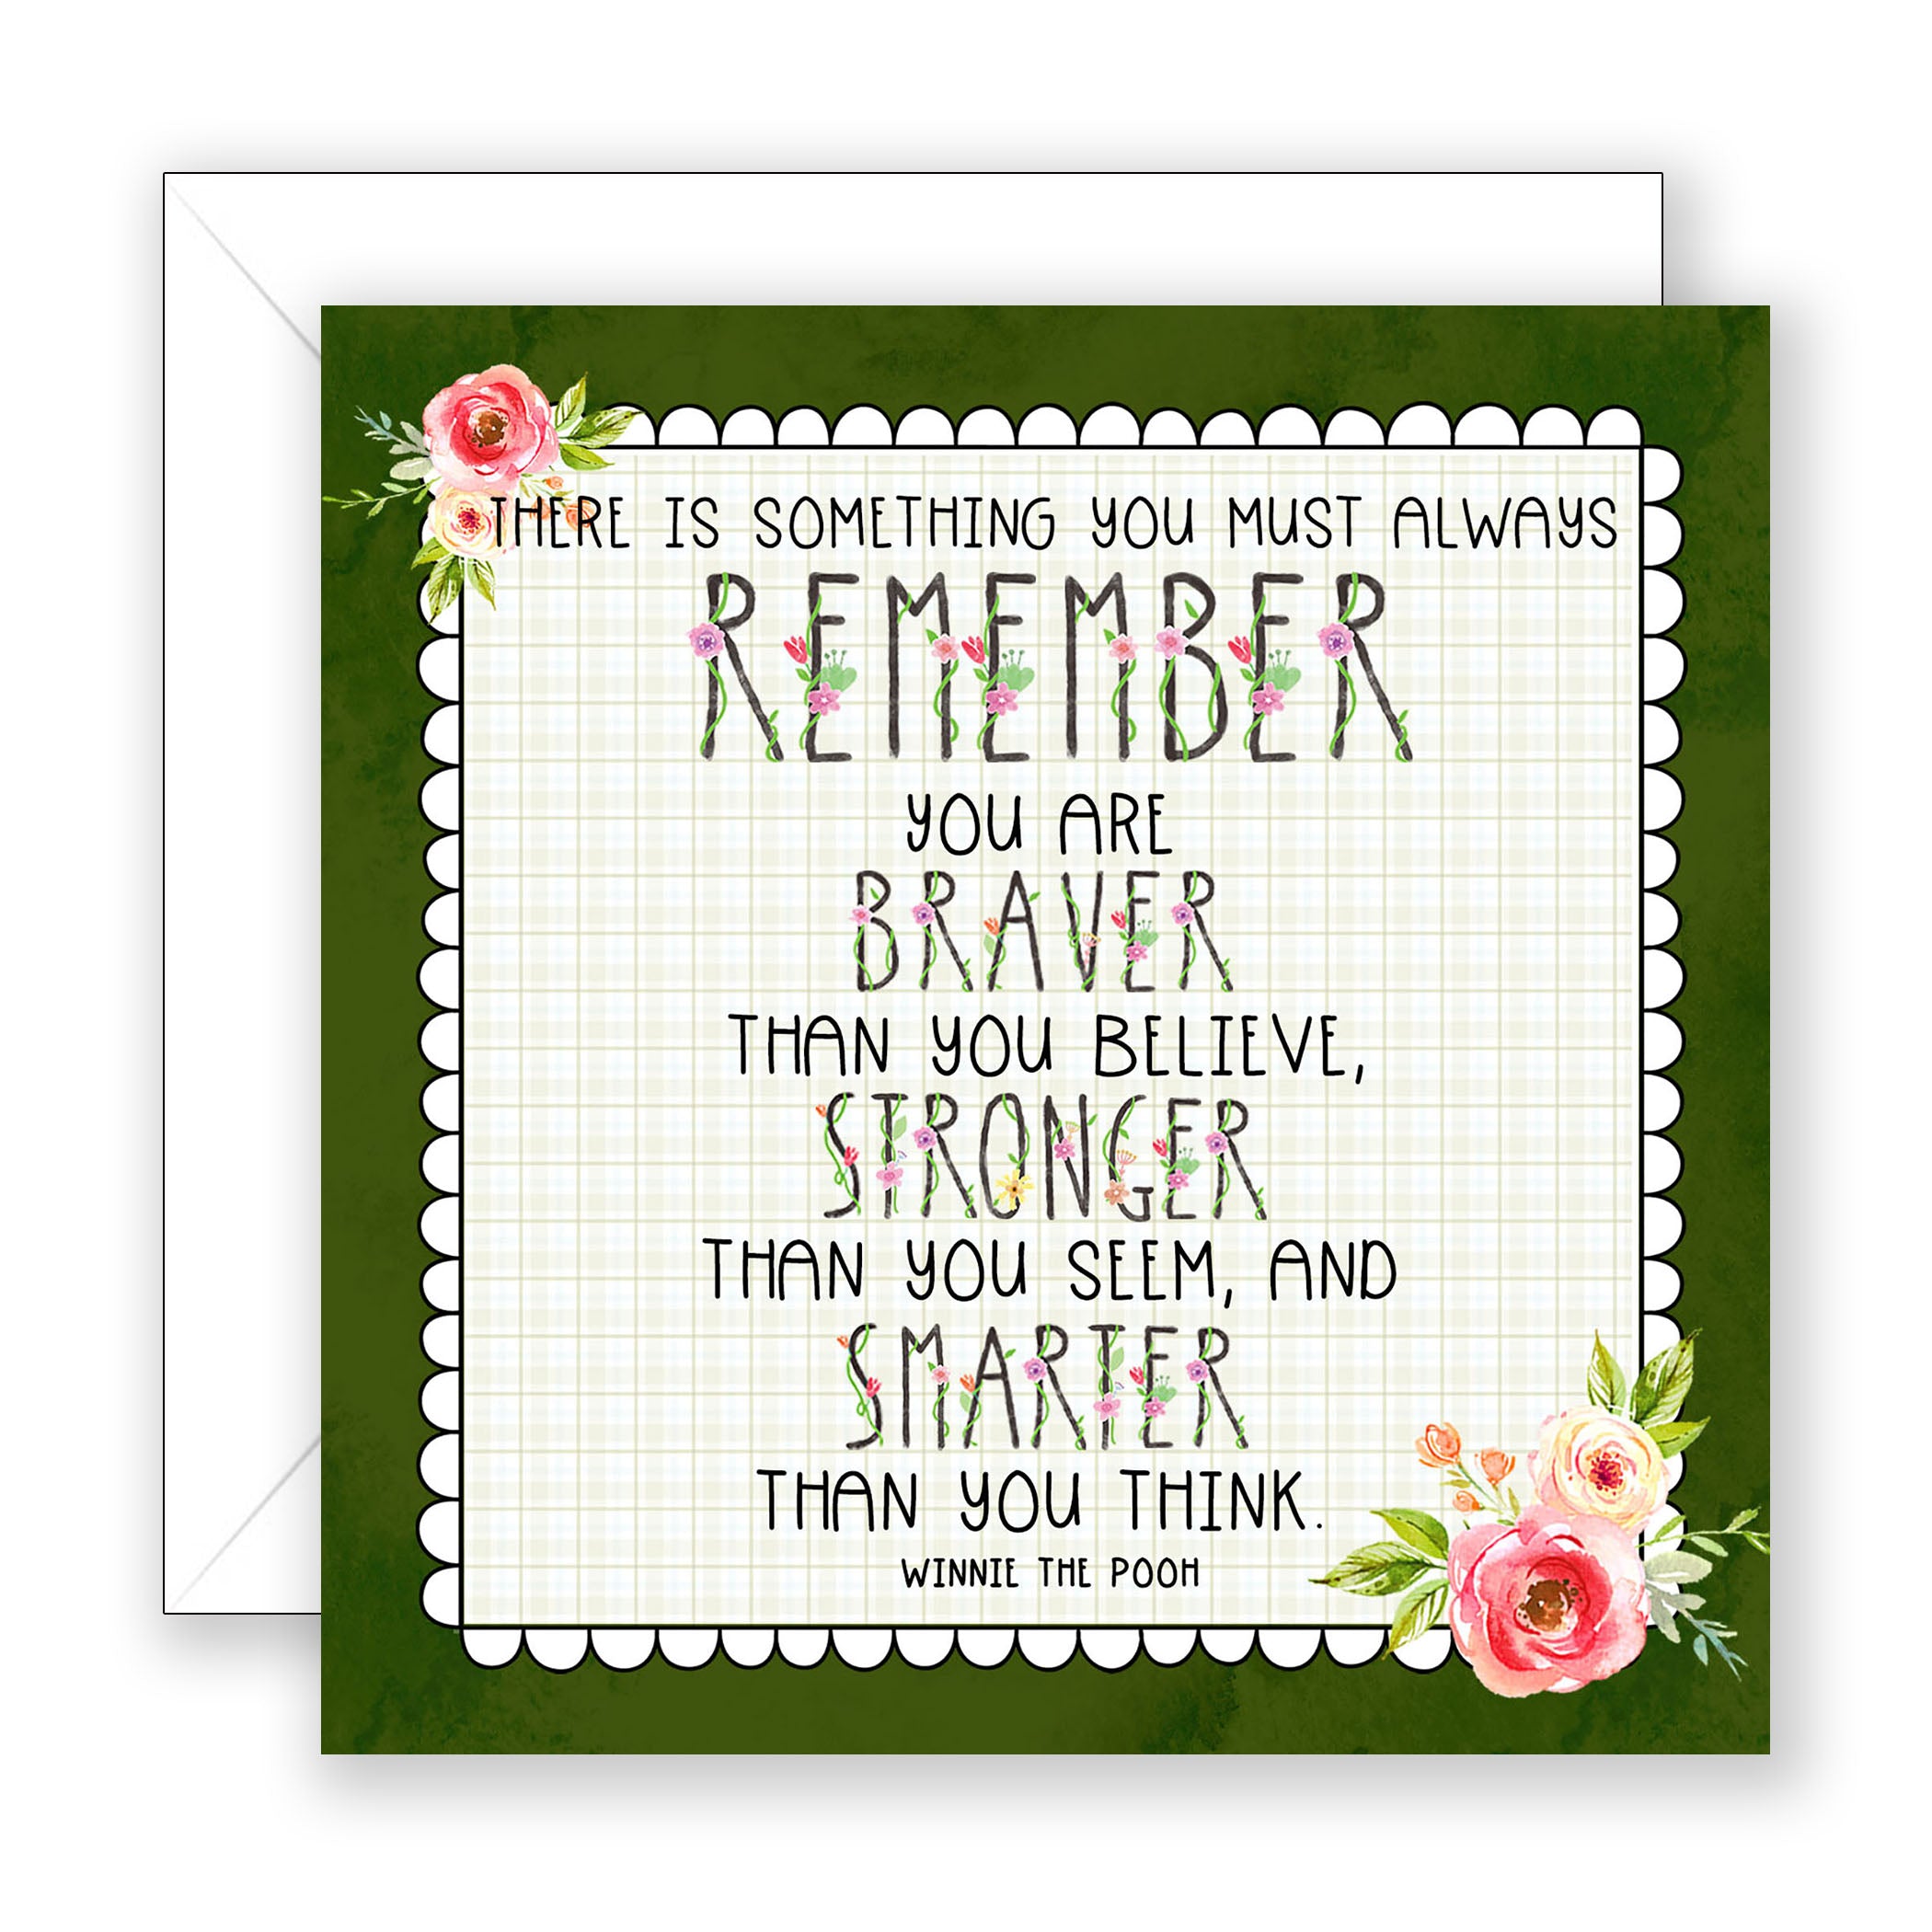 There Is Something - Encouragement Card